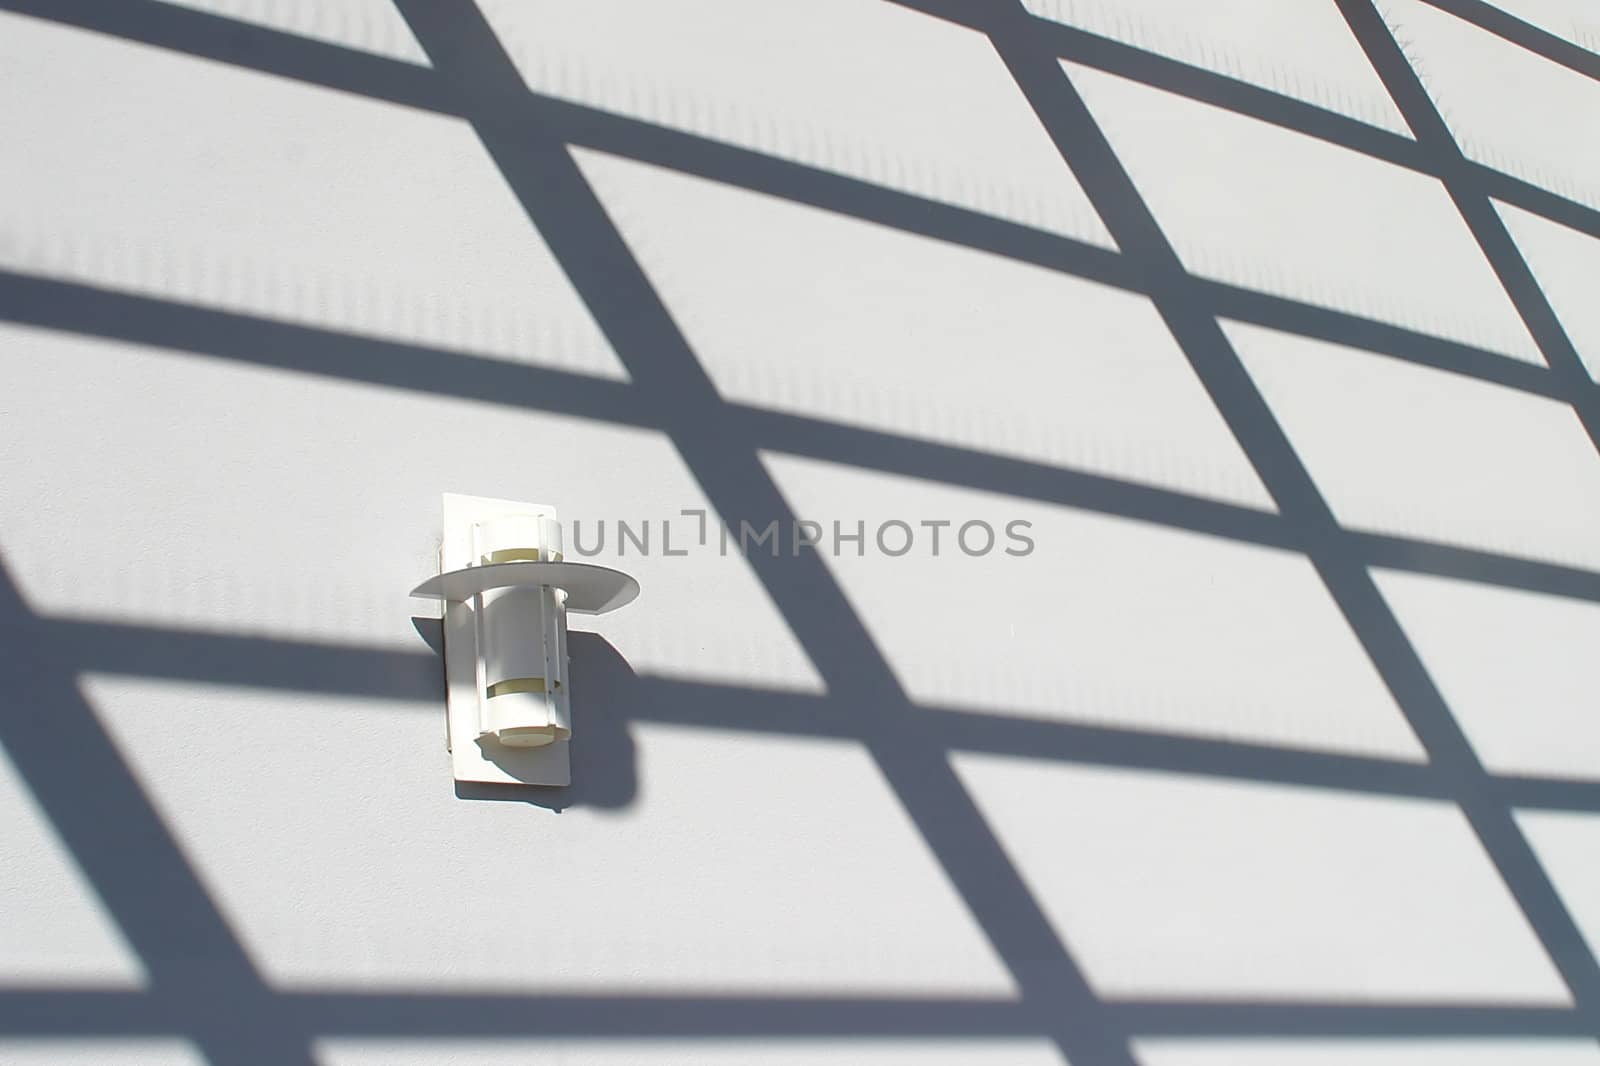 A light on the a wall with shadows that build a design